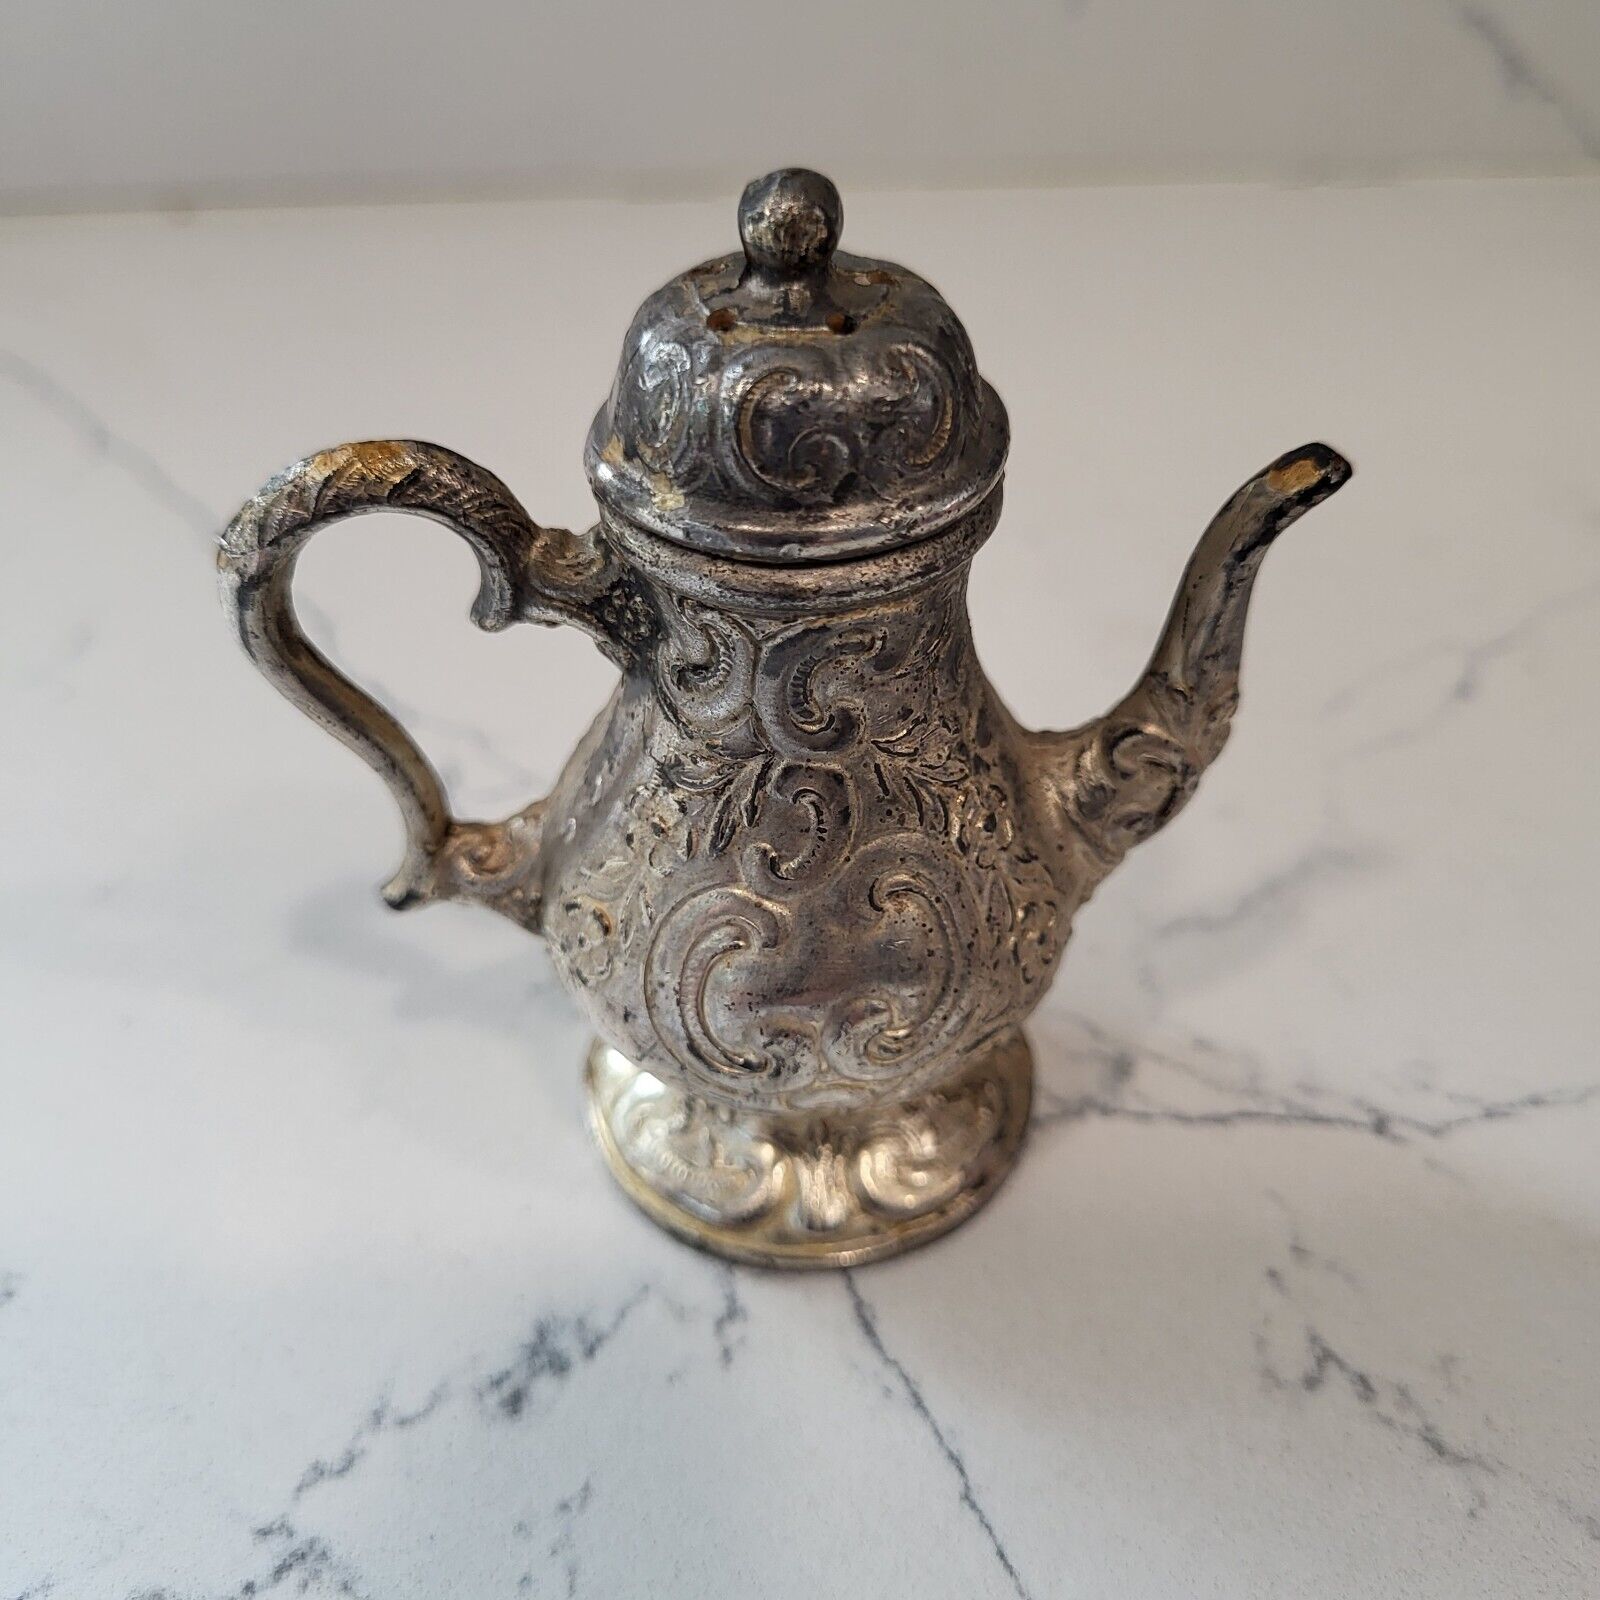 Silverplate Coffee Pot Shaped Salt Shaker with Screw on Lid Vintage Antique